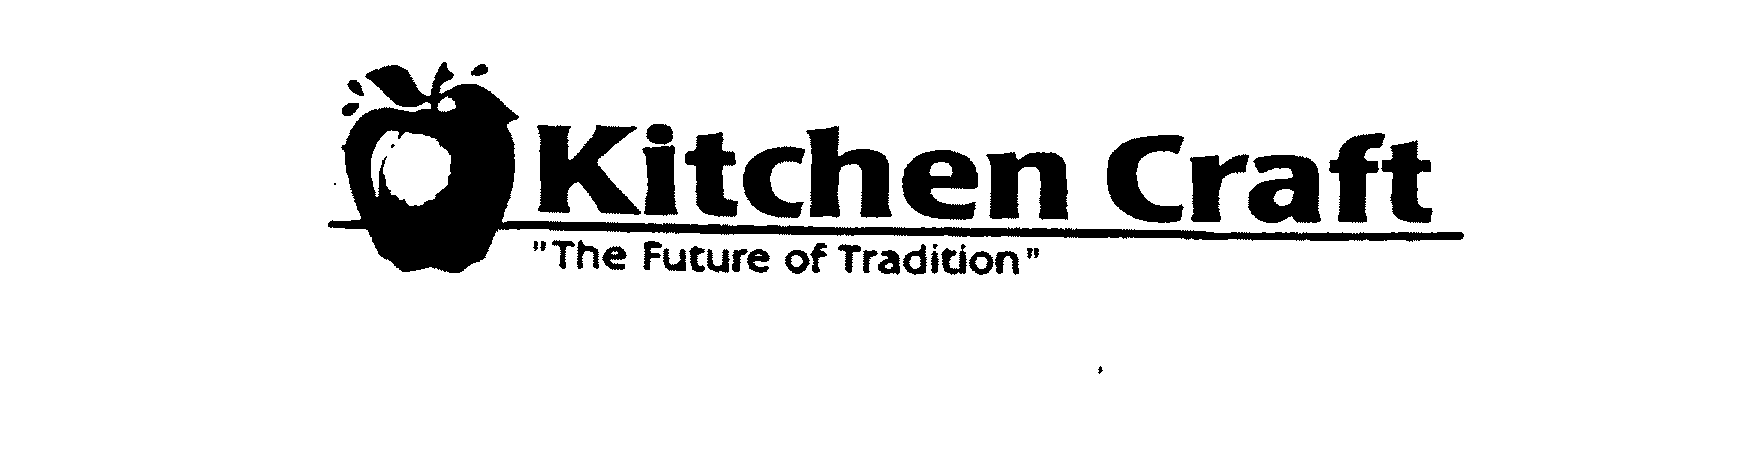  KITCHEN CRAFT &quot;THE FUTURE OF TRADITION&quot;